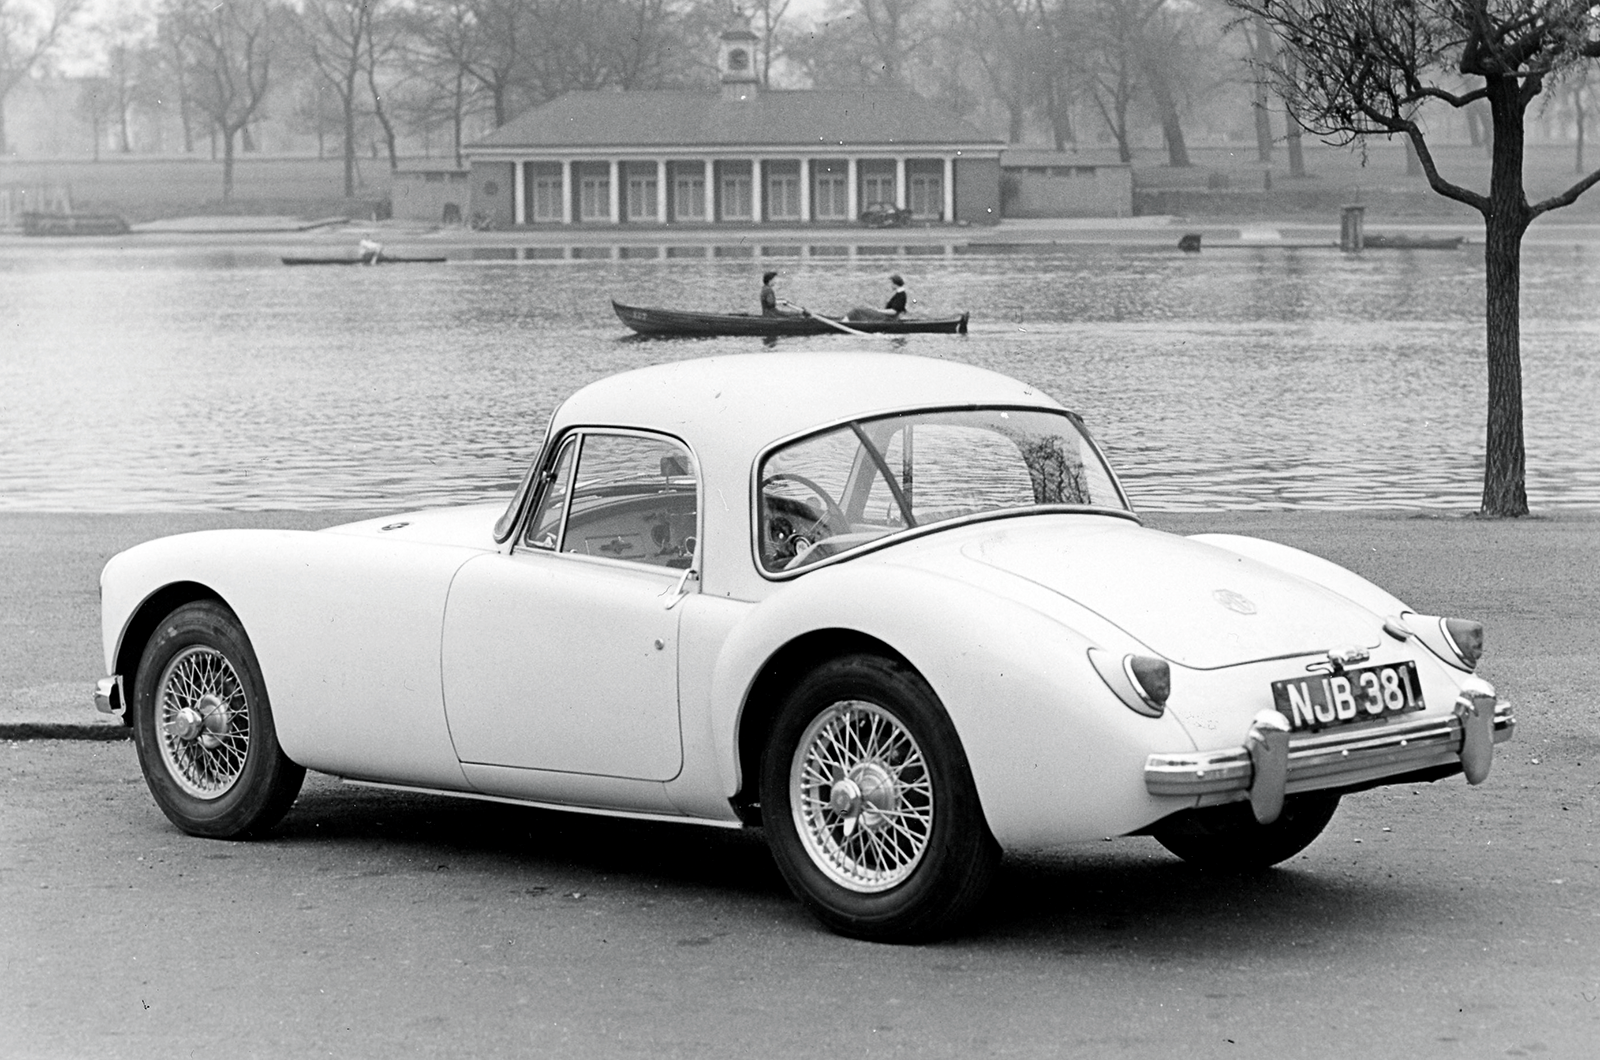 Classic & Sports Car – Buyer’s guide: MGA